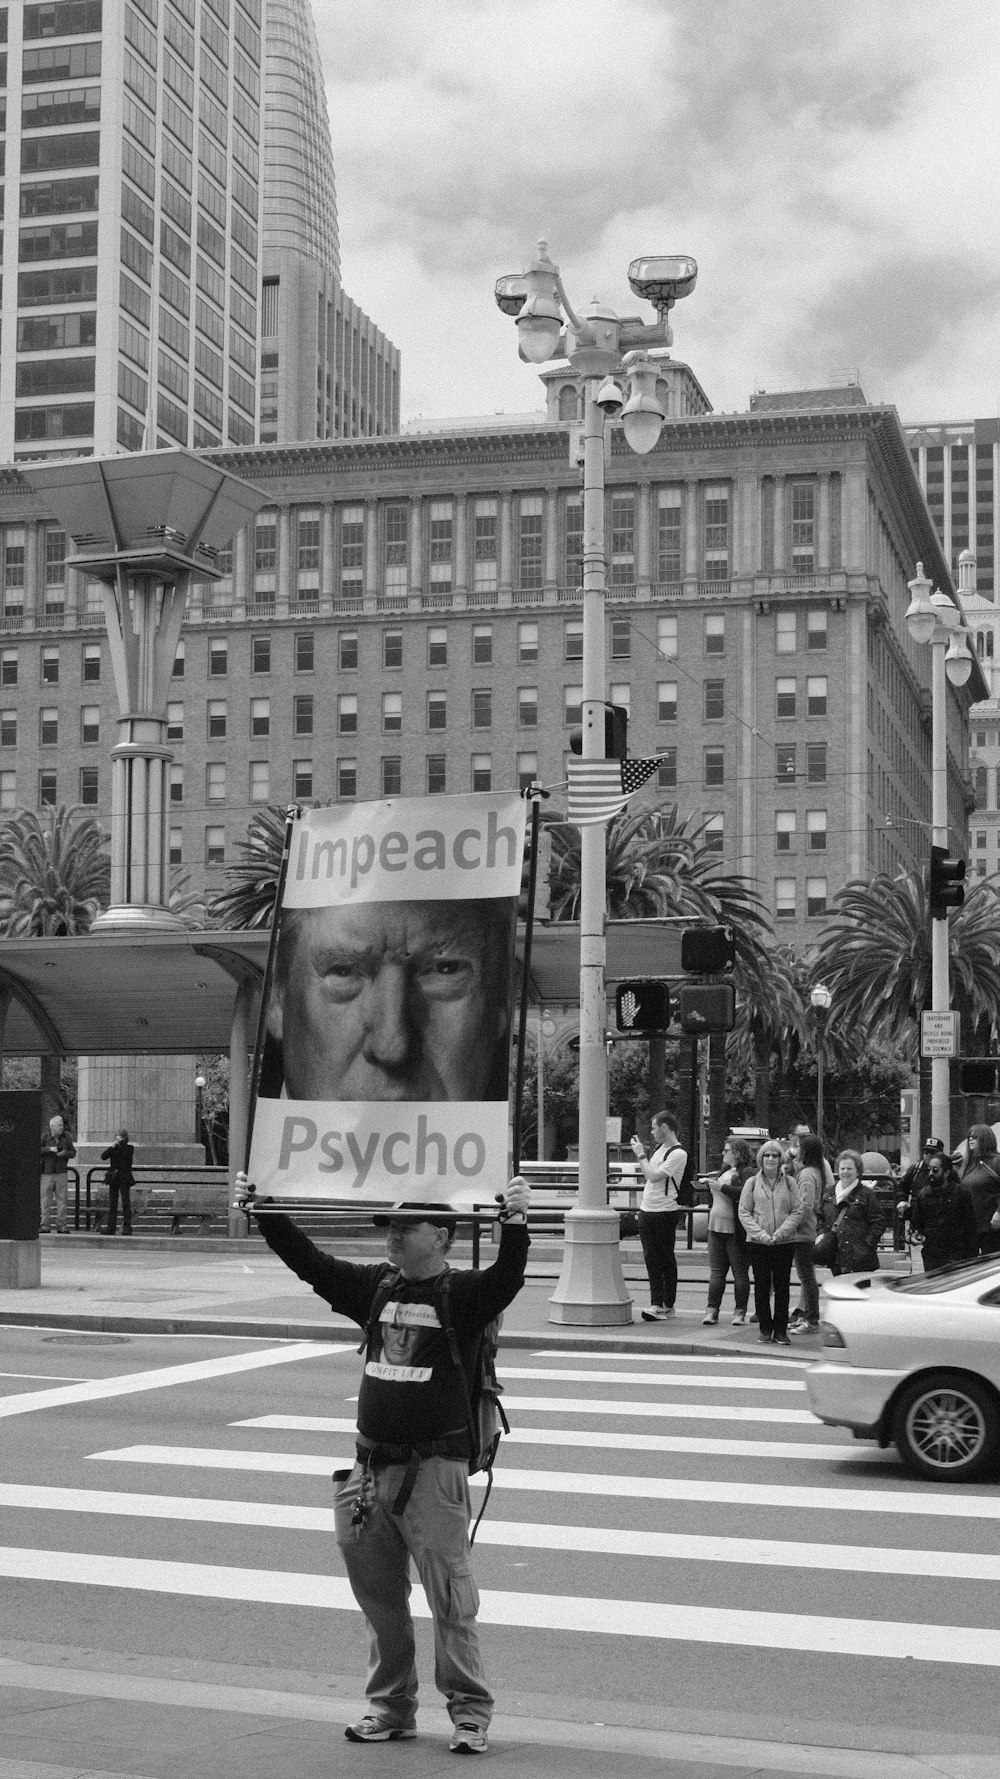 greyscale photography of man standing on road holding psycho banner